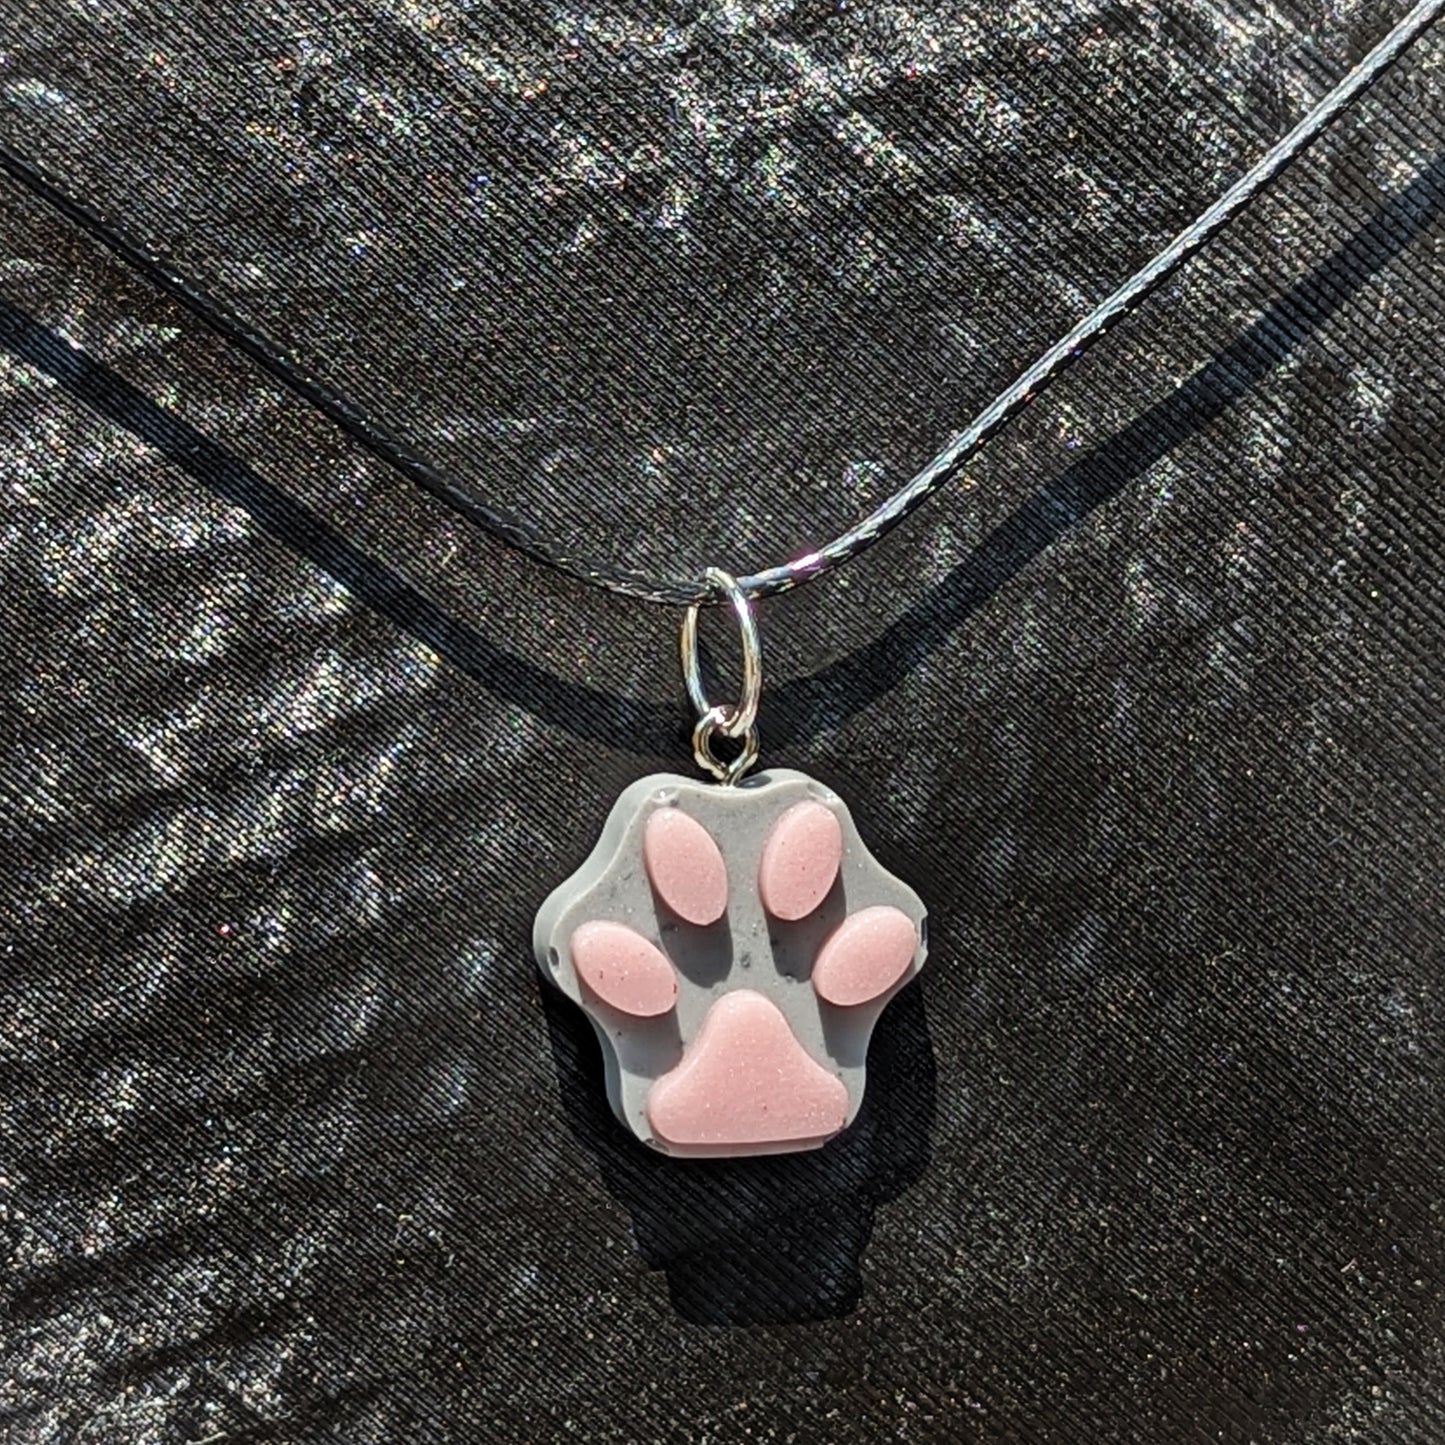 Paw Print Resin Necklace